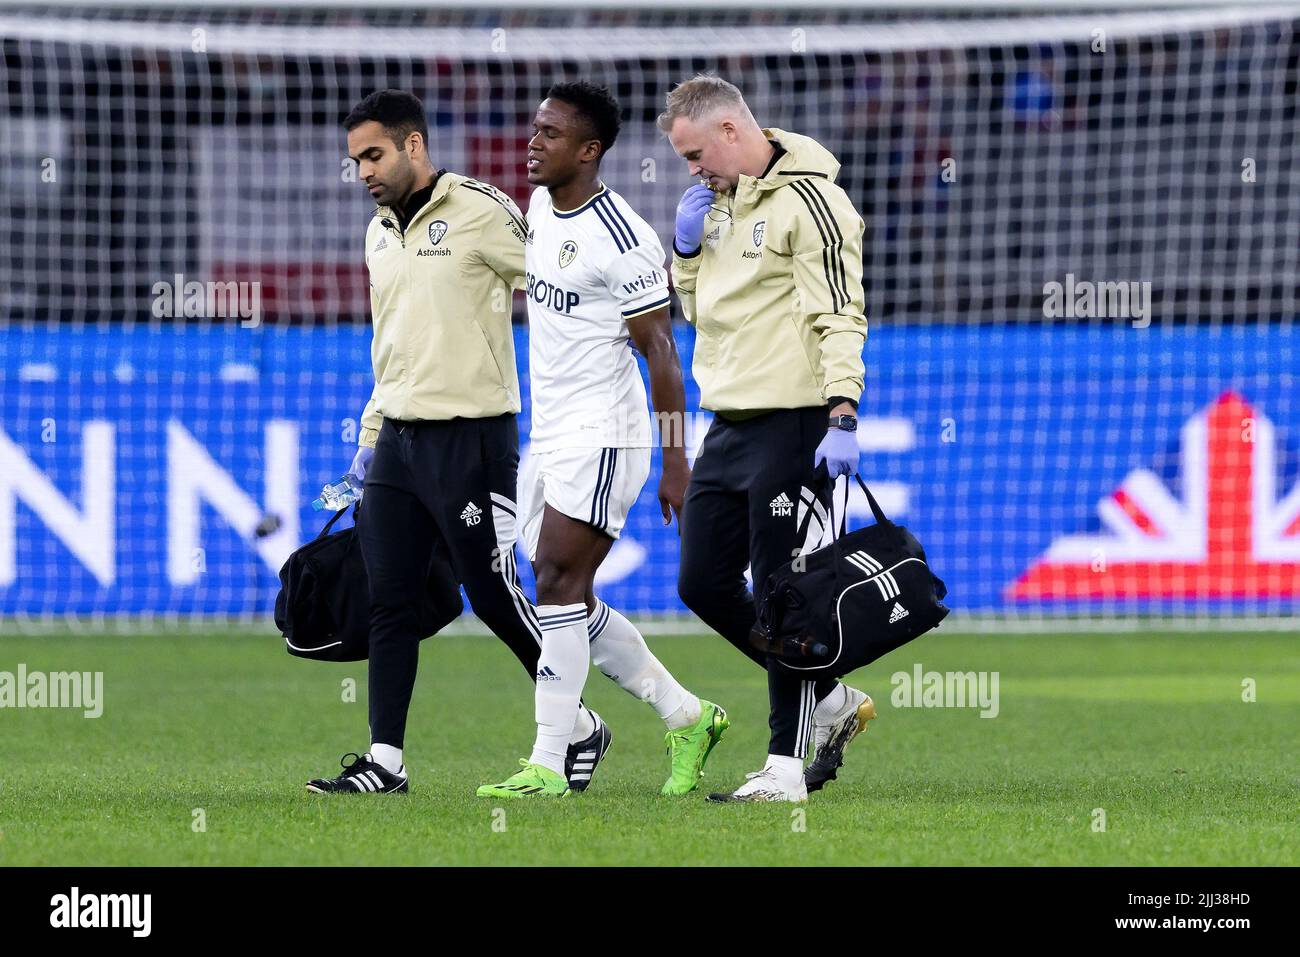 Perth, Australia, 22 July, 2022. Luis Sinisterra of Leeds United leaves the pitch after being injured during the ICON Festival of International Football match between Crystal Palace and Leeds United at Optus Stadium on July 22, 2022 in Perth, Australia. Credit: Graham Conaty/Speed Media/Alamy Live News Stock Photo